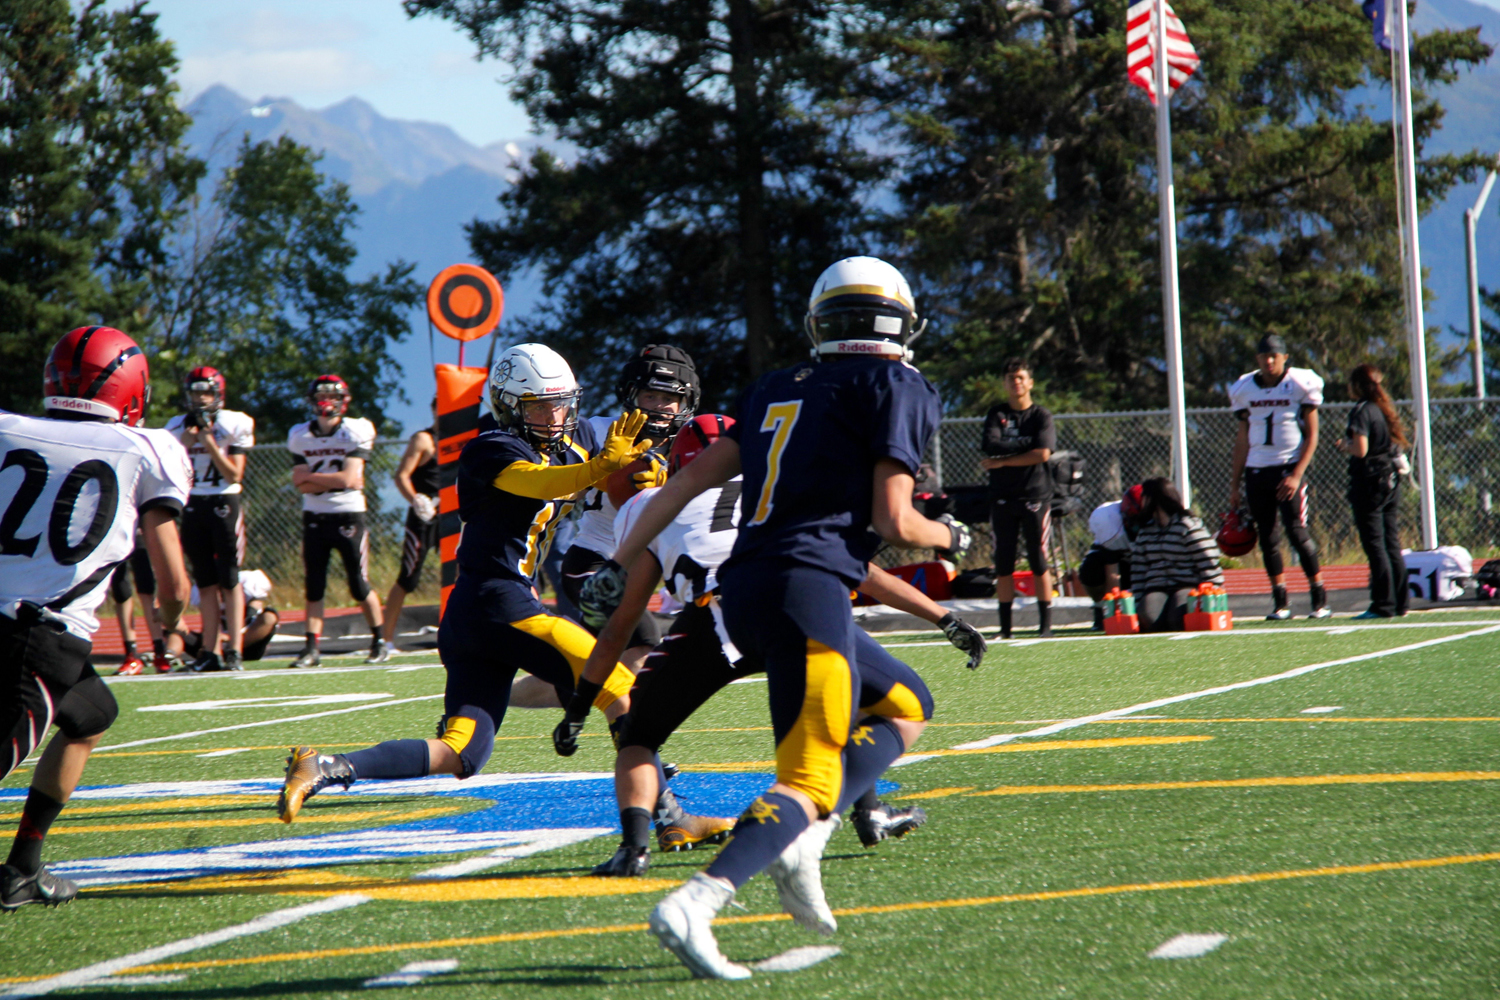 Mariner Justin Sumption uses his arm to block an Eielson Raven during Saturday’s game at Homer High School. -Photo by Annali Metz, Homer High School